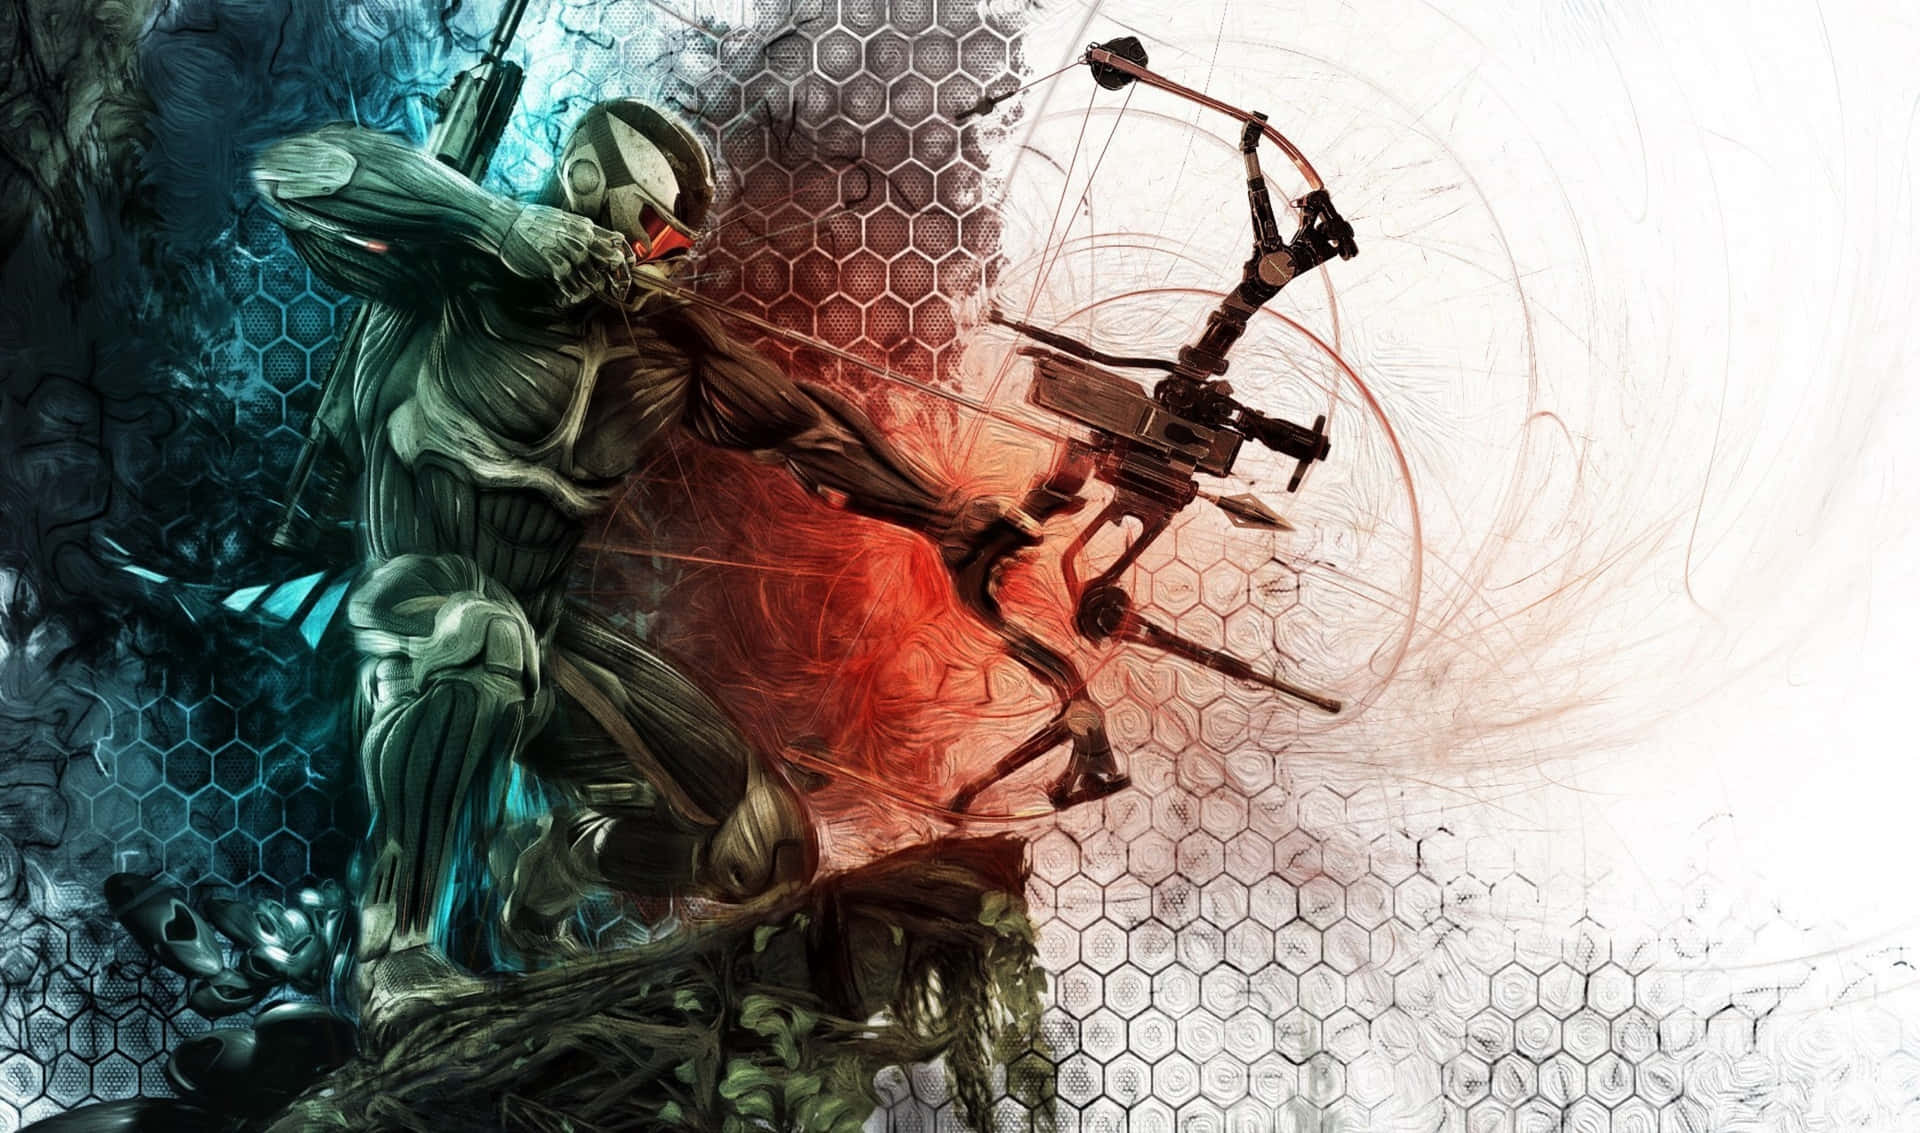 The Epic Crysis 3 Wallpaper